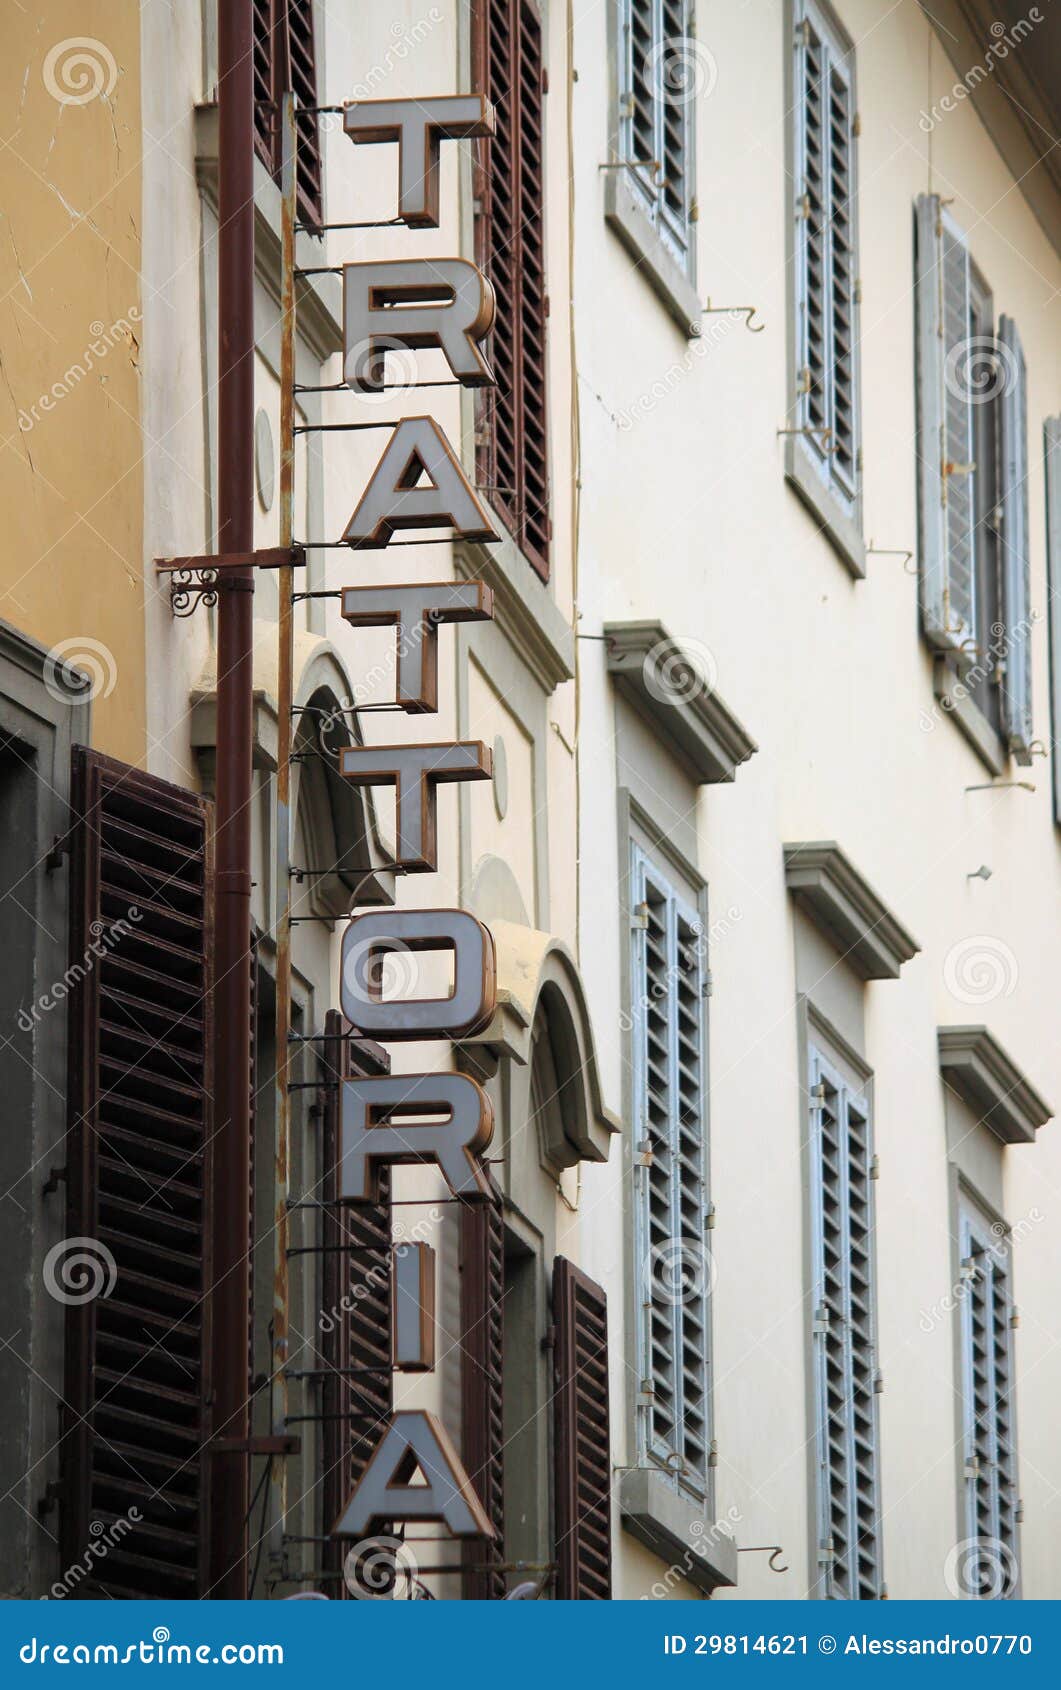  Trattoria sign  in Italy stock image Image of briks diner 